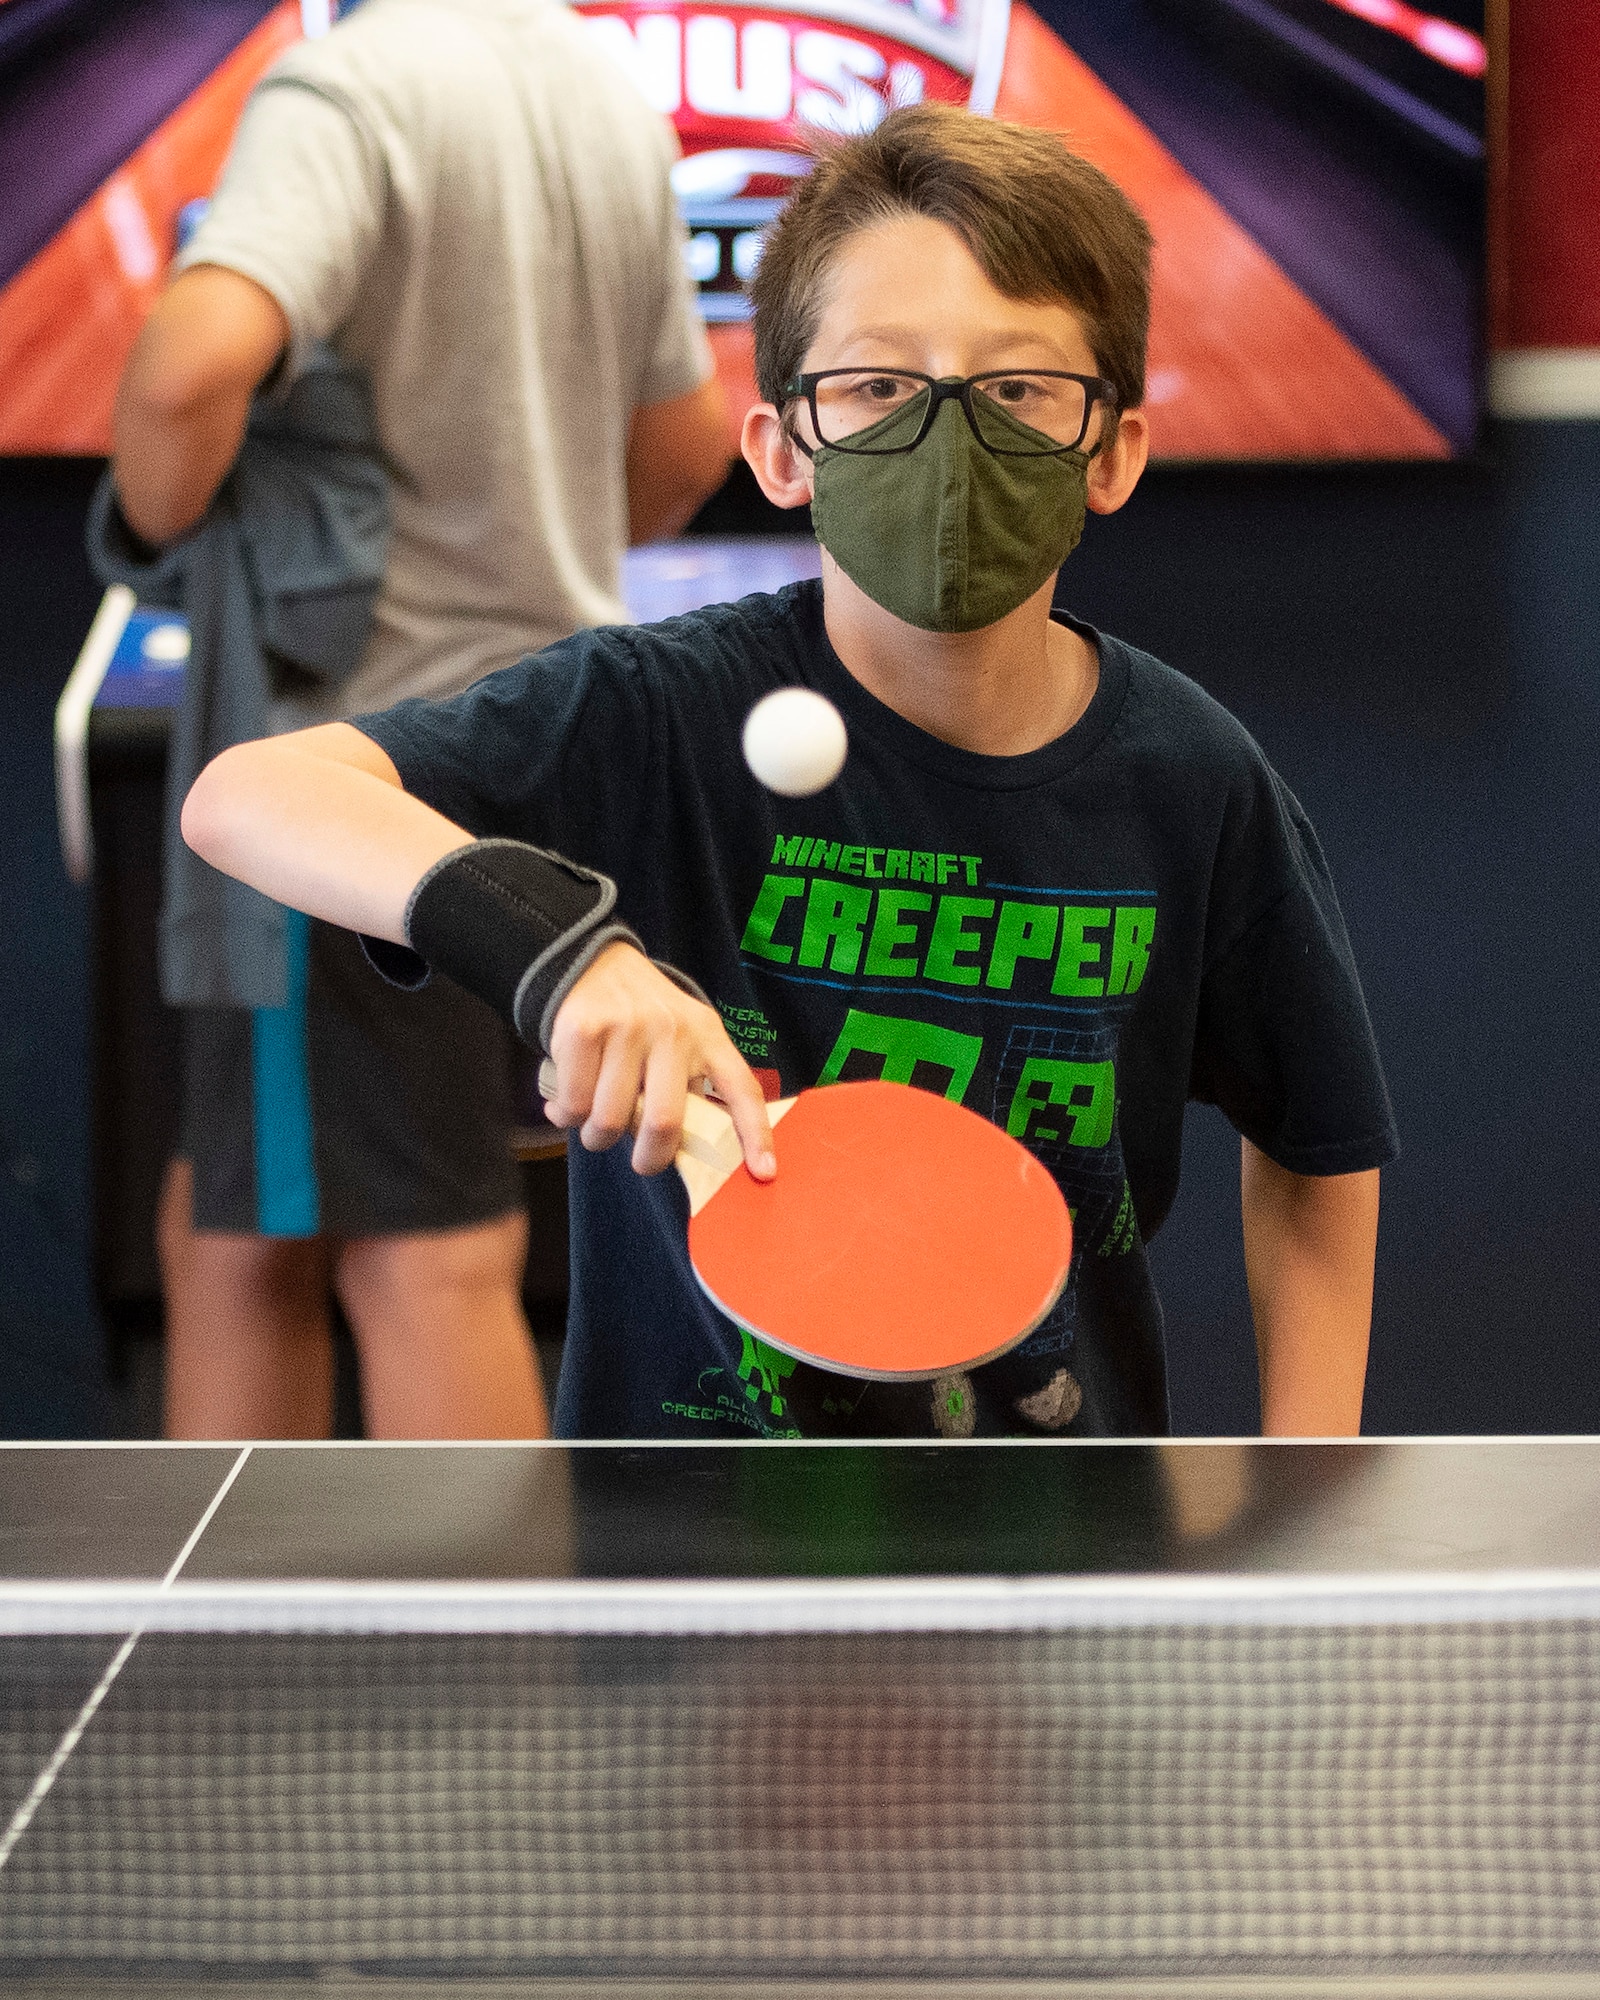 Julian Serna, 12, plays a game of pingpong June 10, 2021, in the Prairies Youth Center’s new game room. The 88th Force Support Squadron is opening the room full of free arcade games June 18. (U.S. Air Force photo by R.J. Oriez)